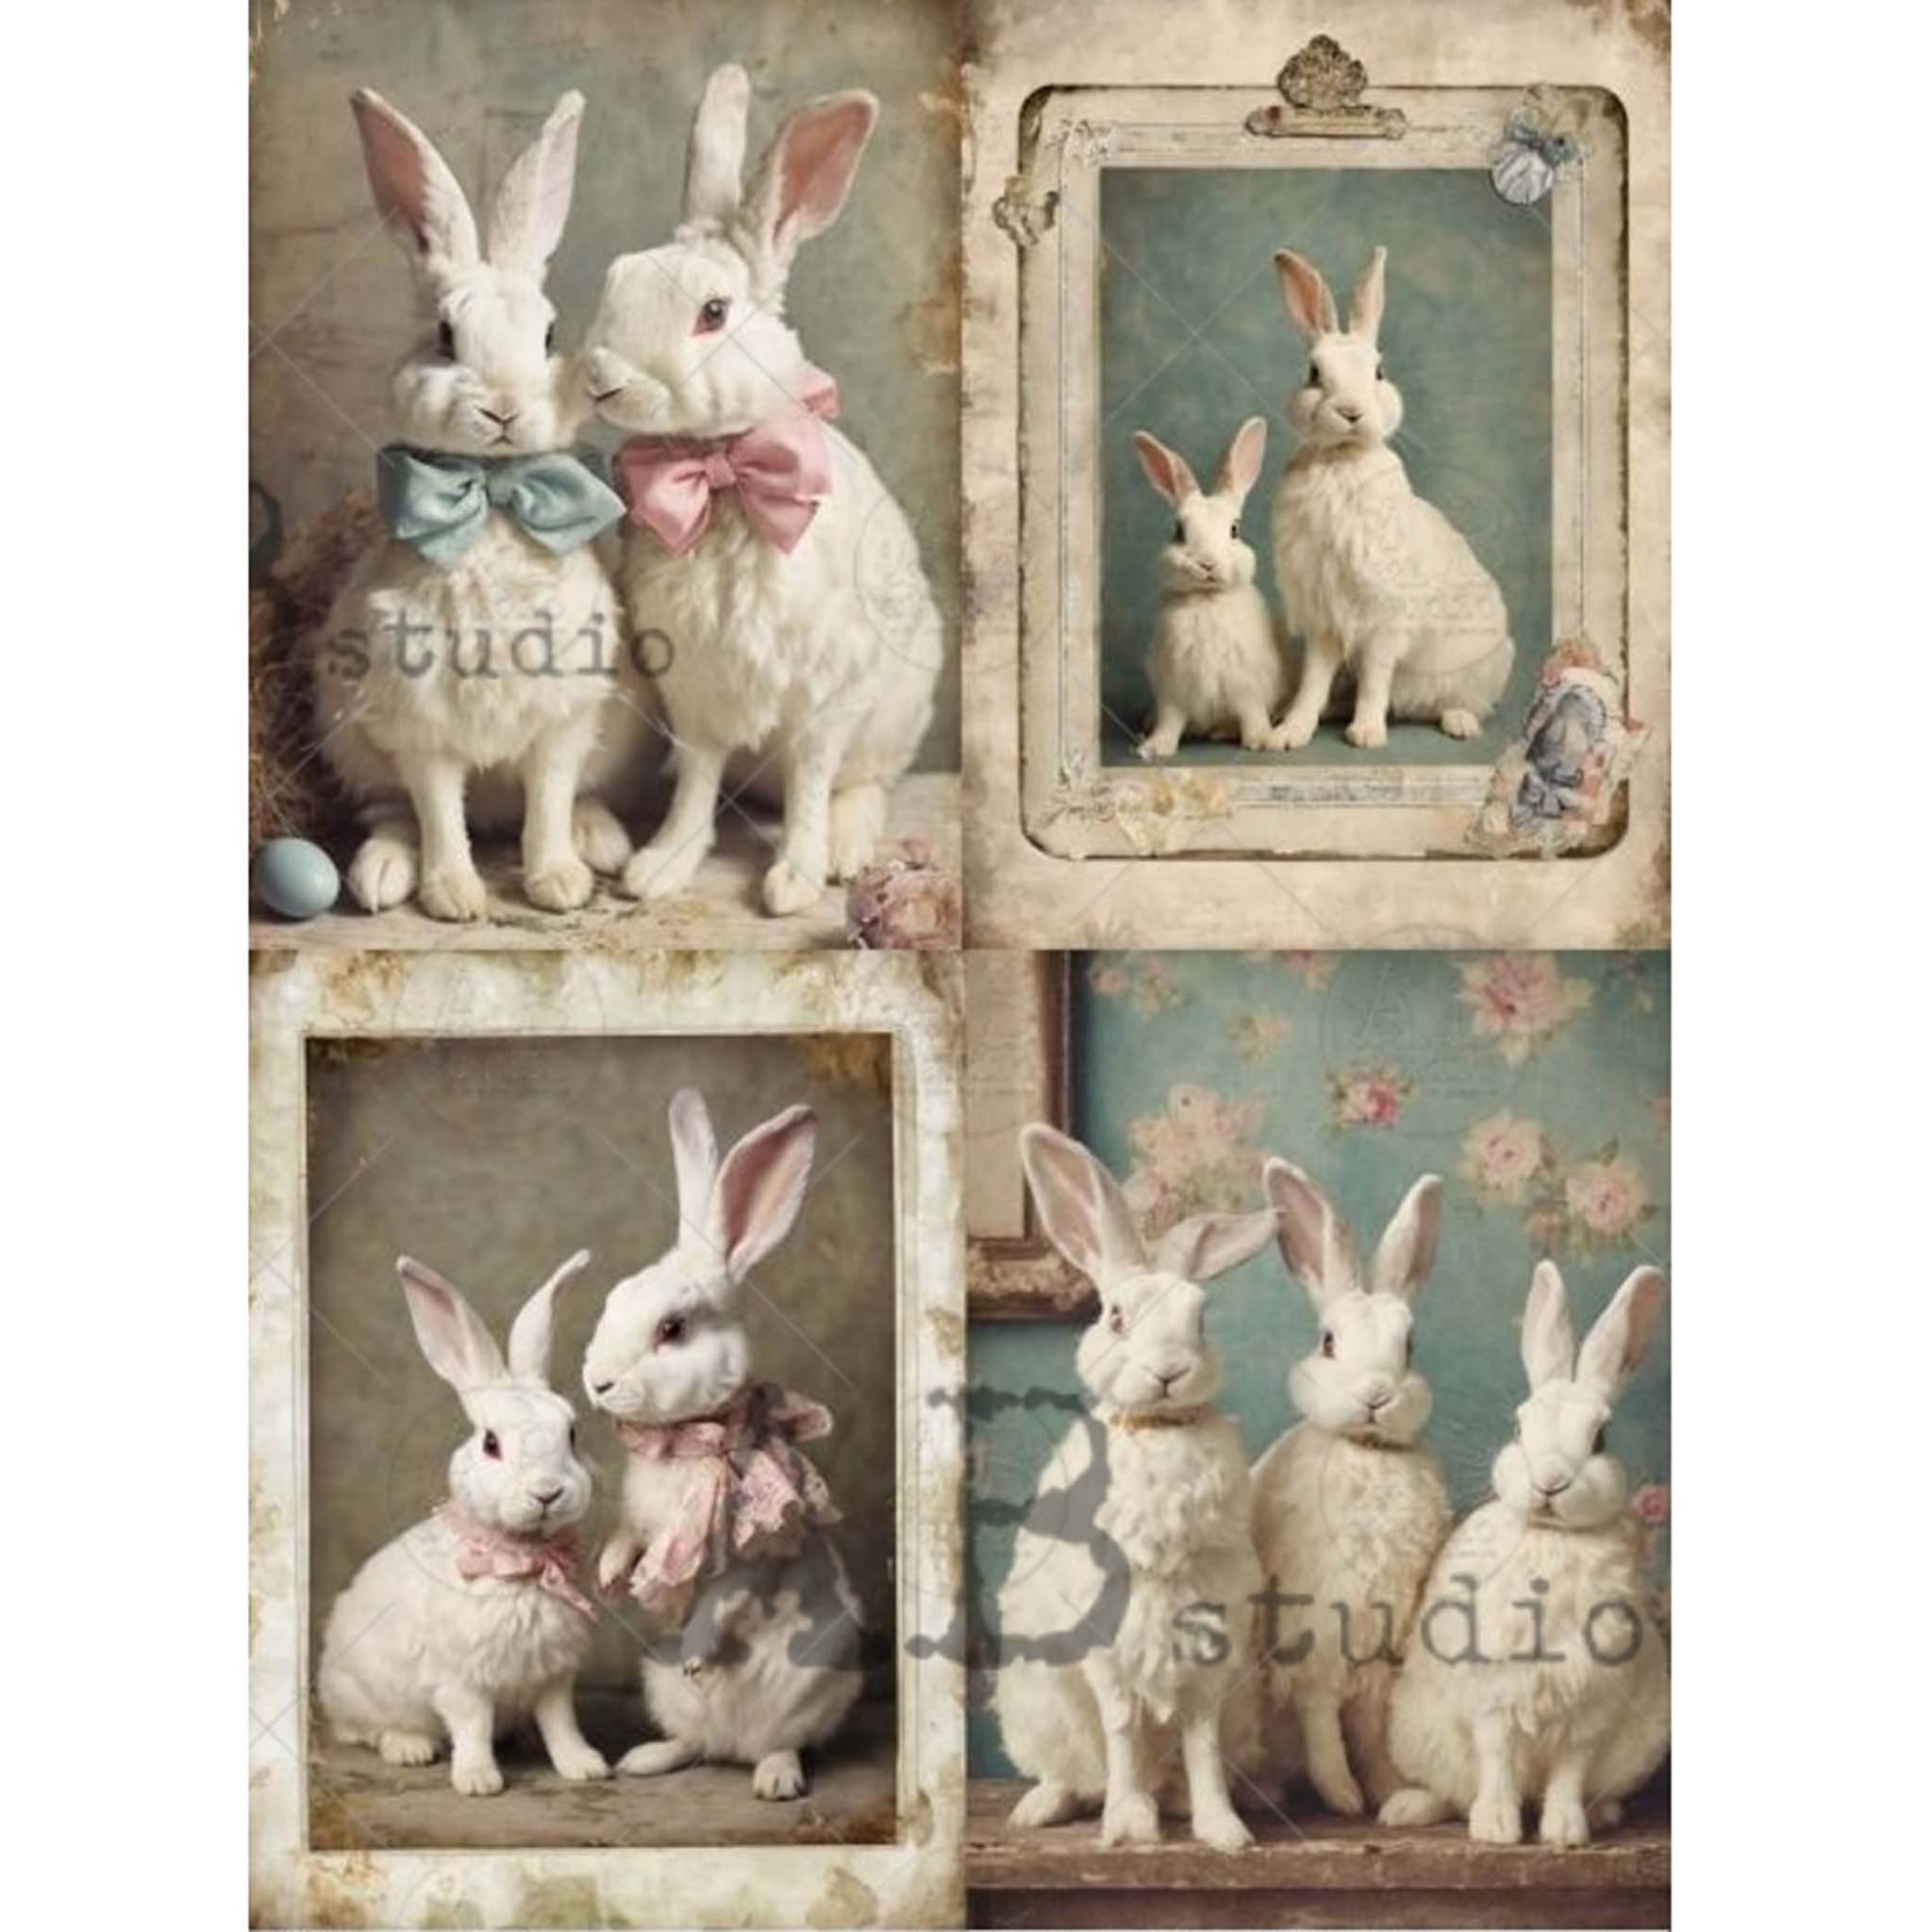 Close-up of an A4 rice paper design featuring 4 adorable bunny family portraits is against a white background.